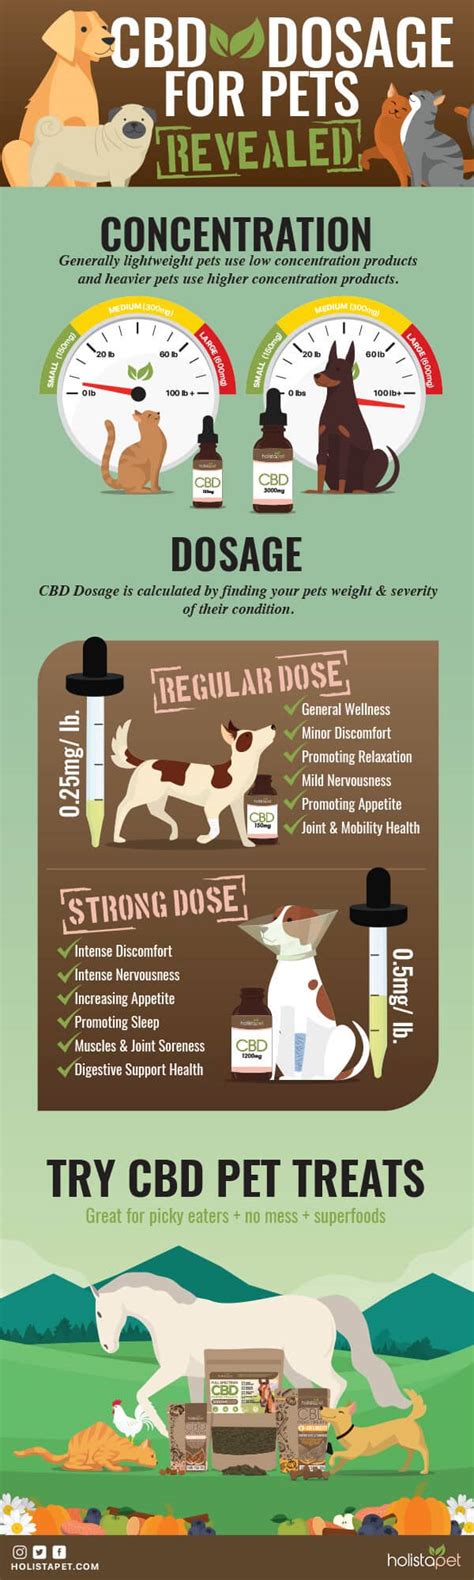  Your dog may need more or less CBD, depending on the dog and how severe their health issues are